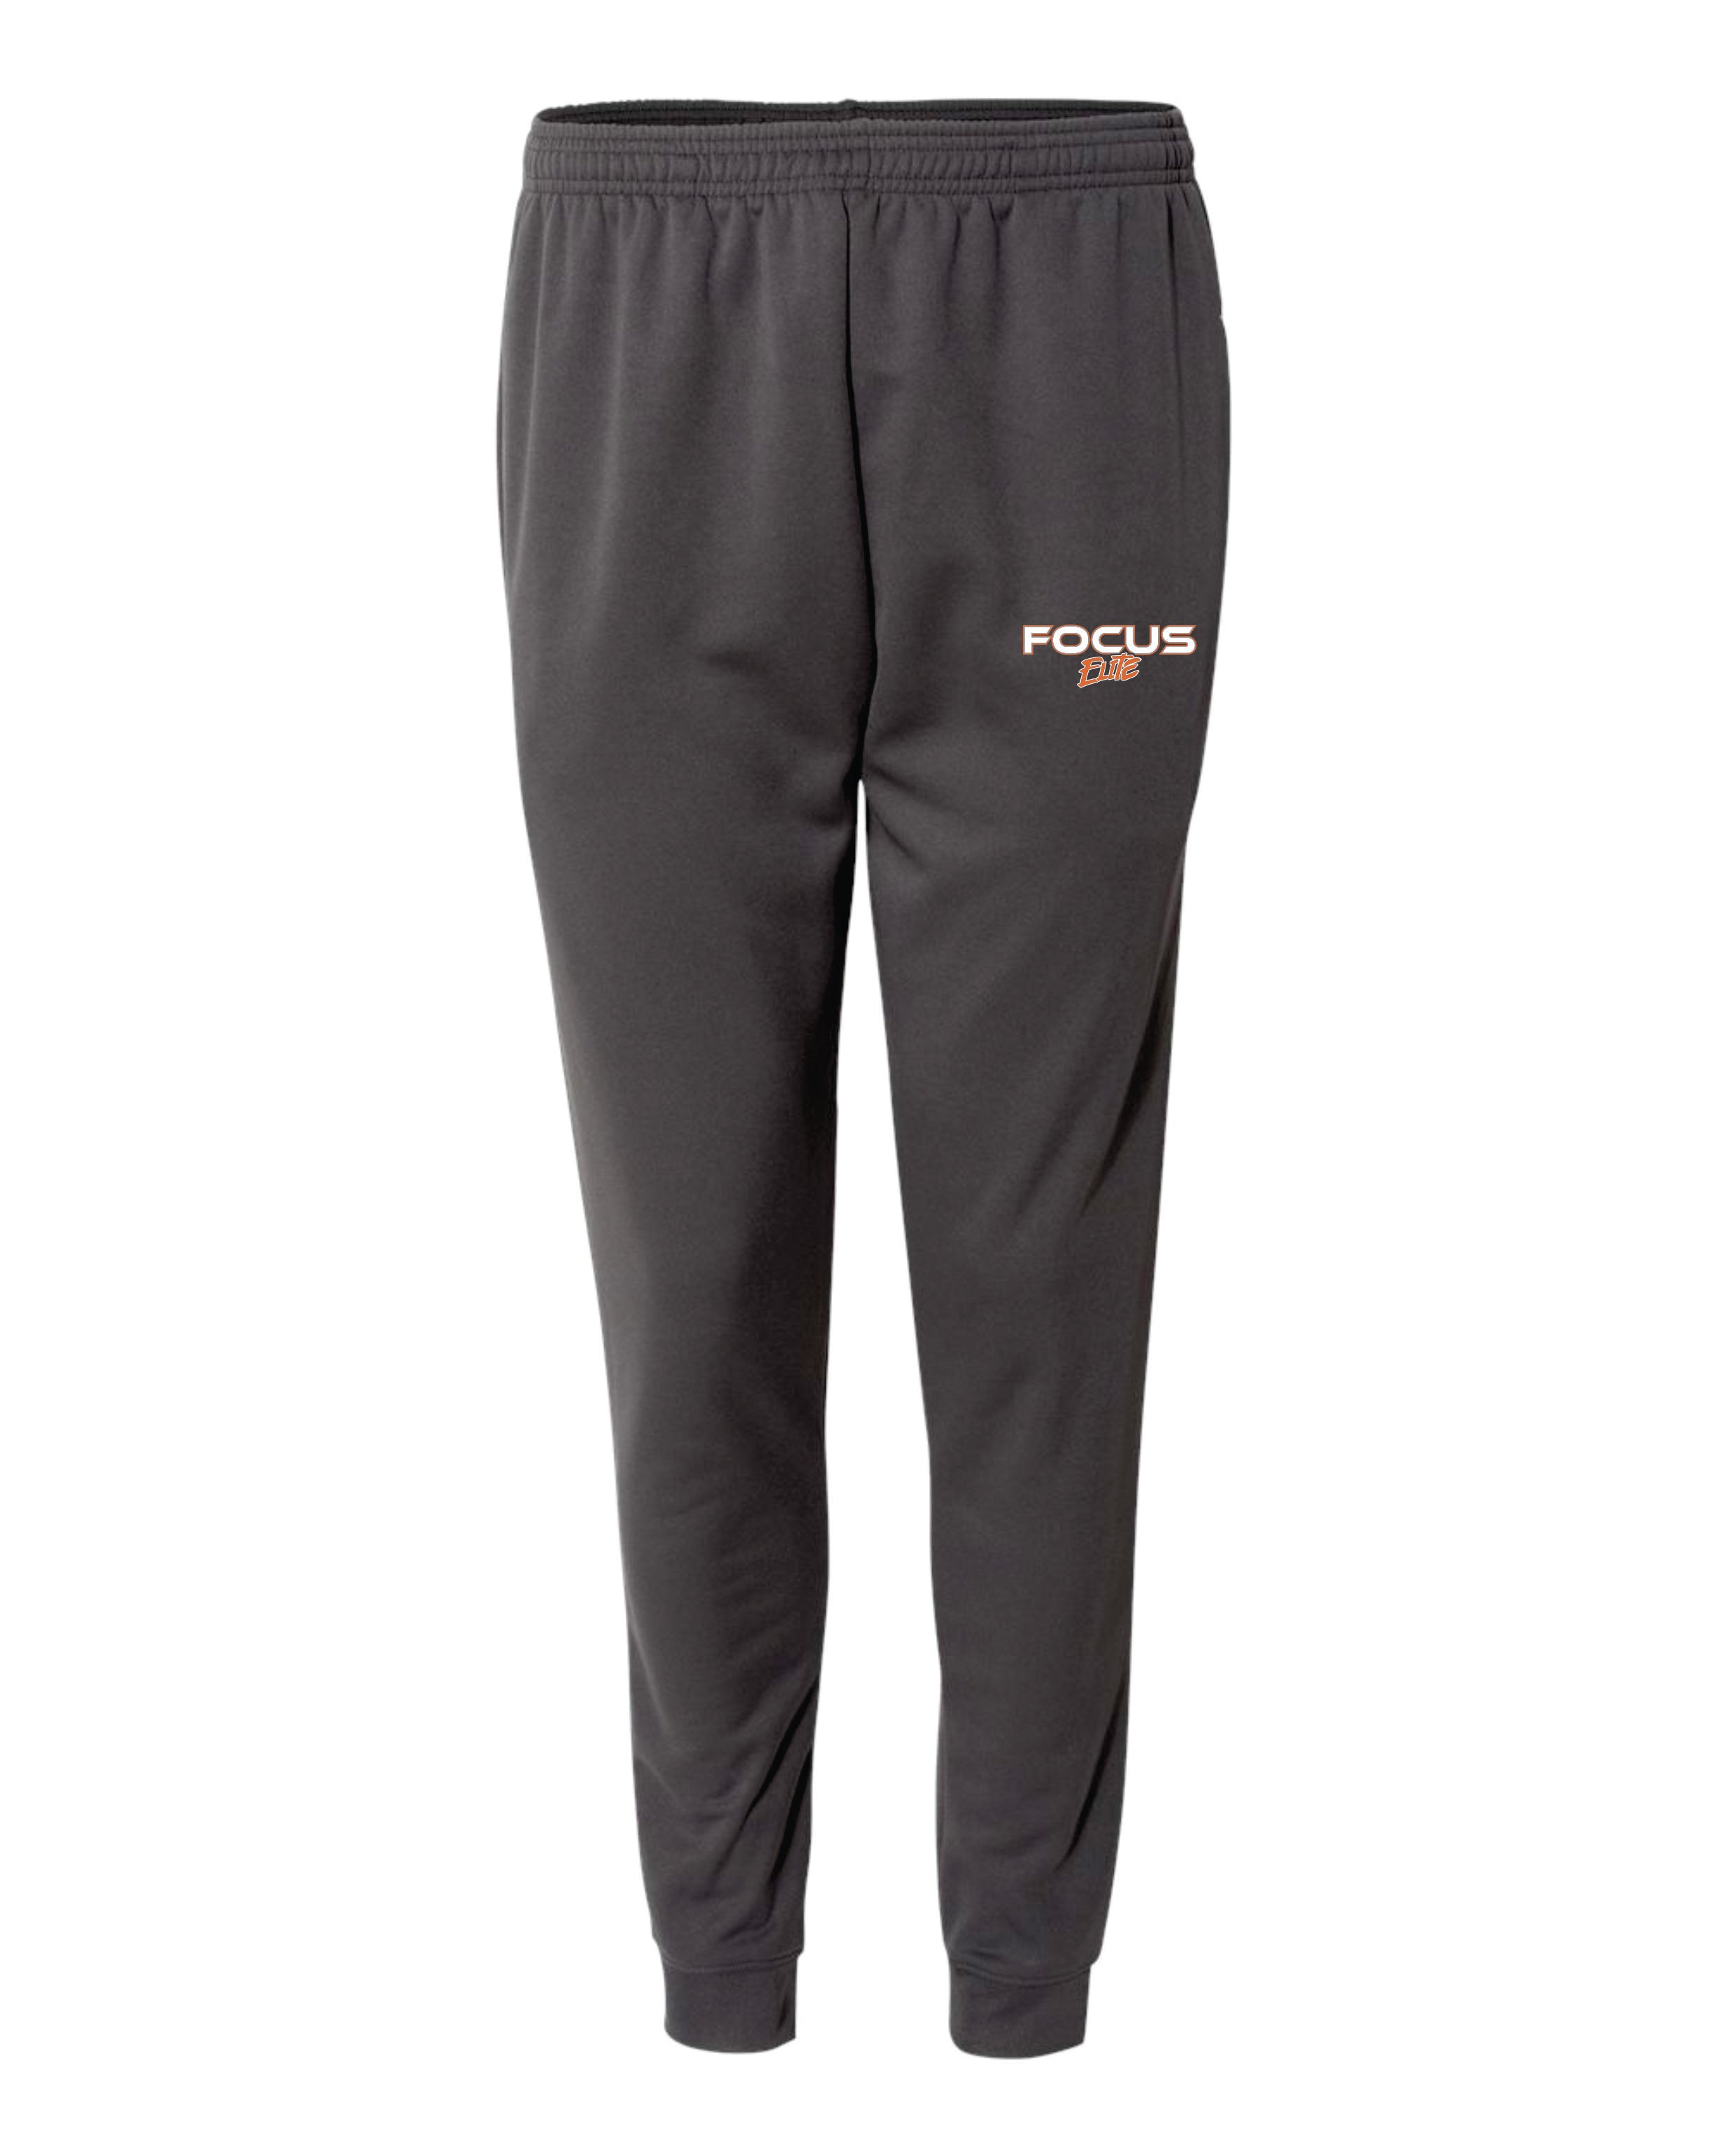 Focus Joggers by Badger - Adult